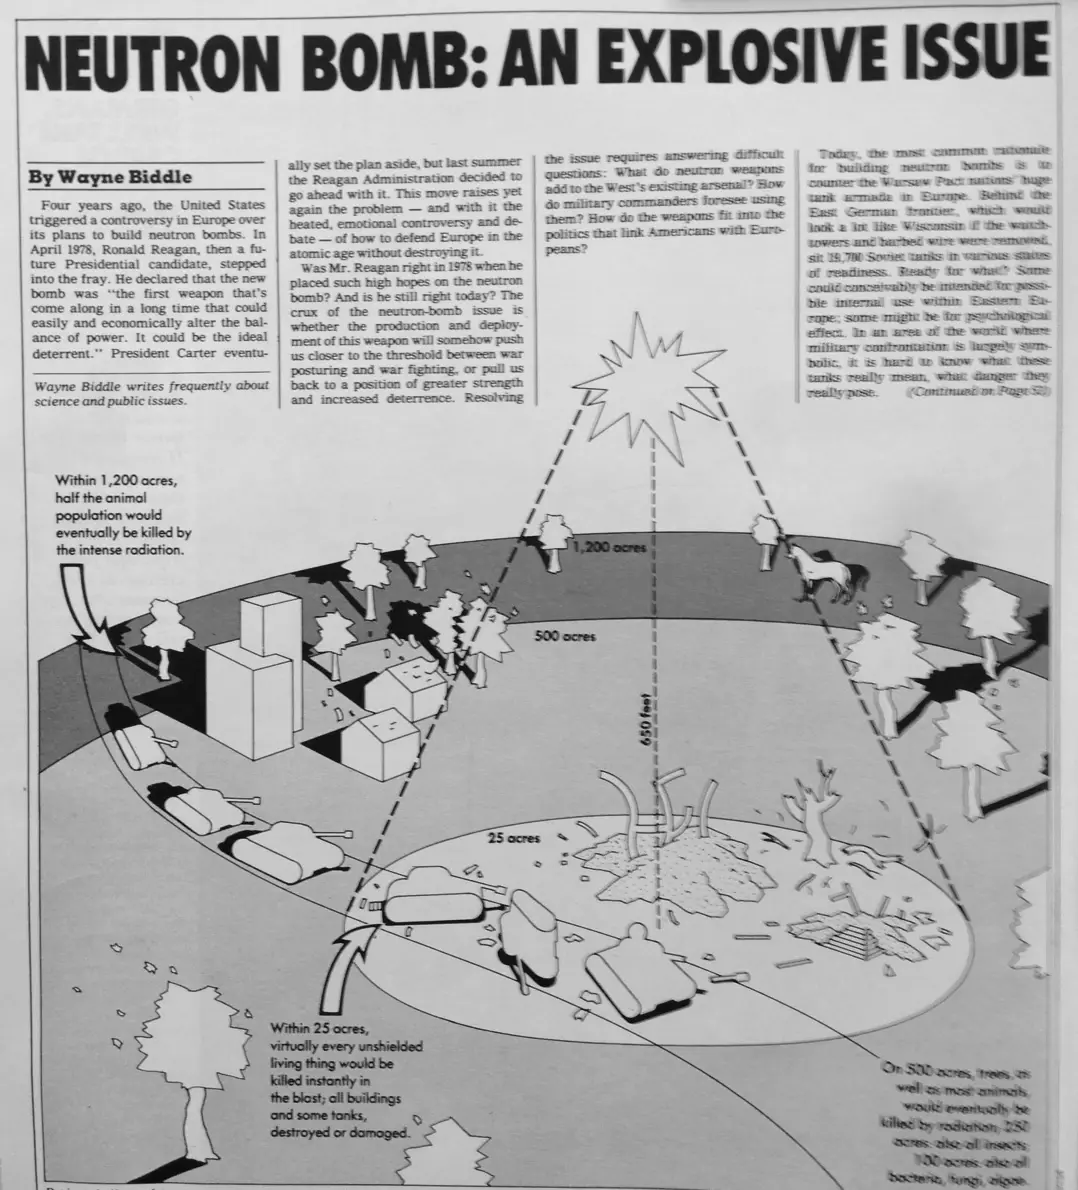 Why did the neutron bomb disappear as it developed?